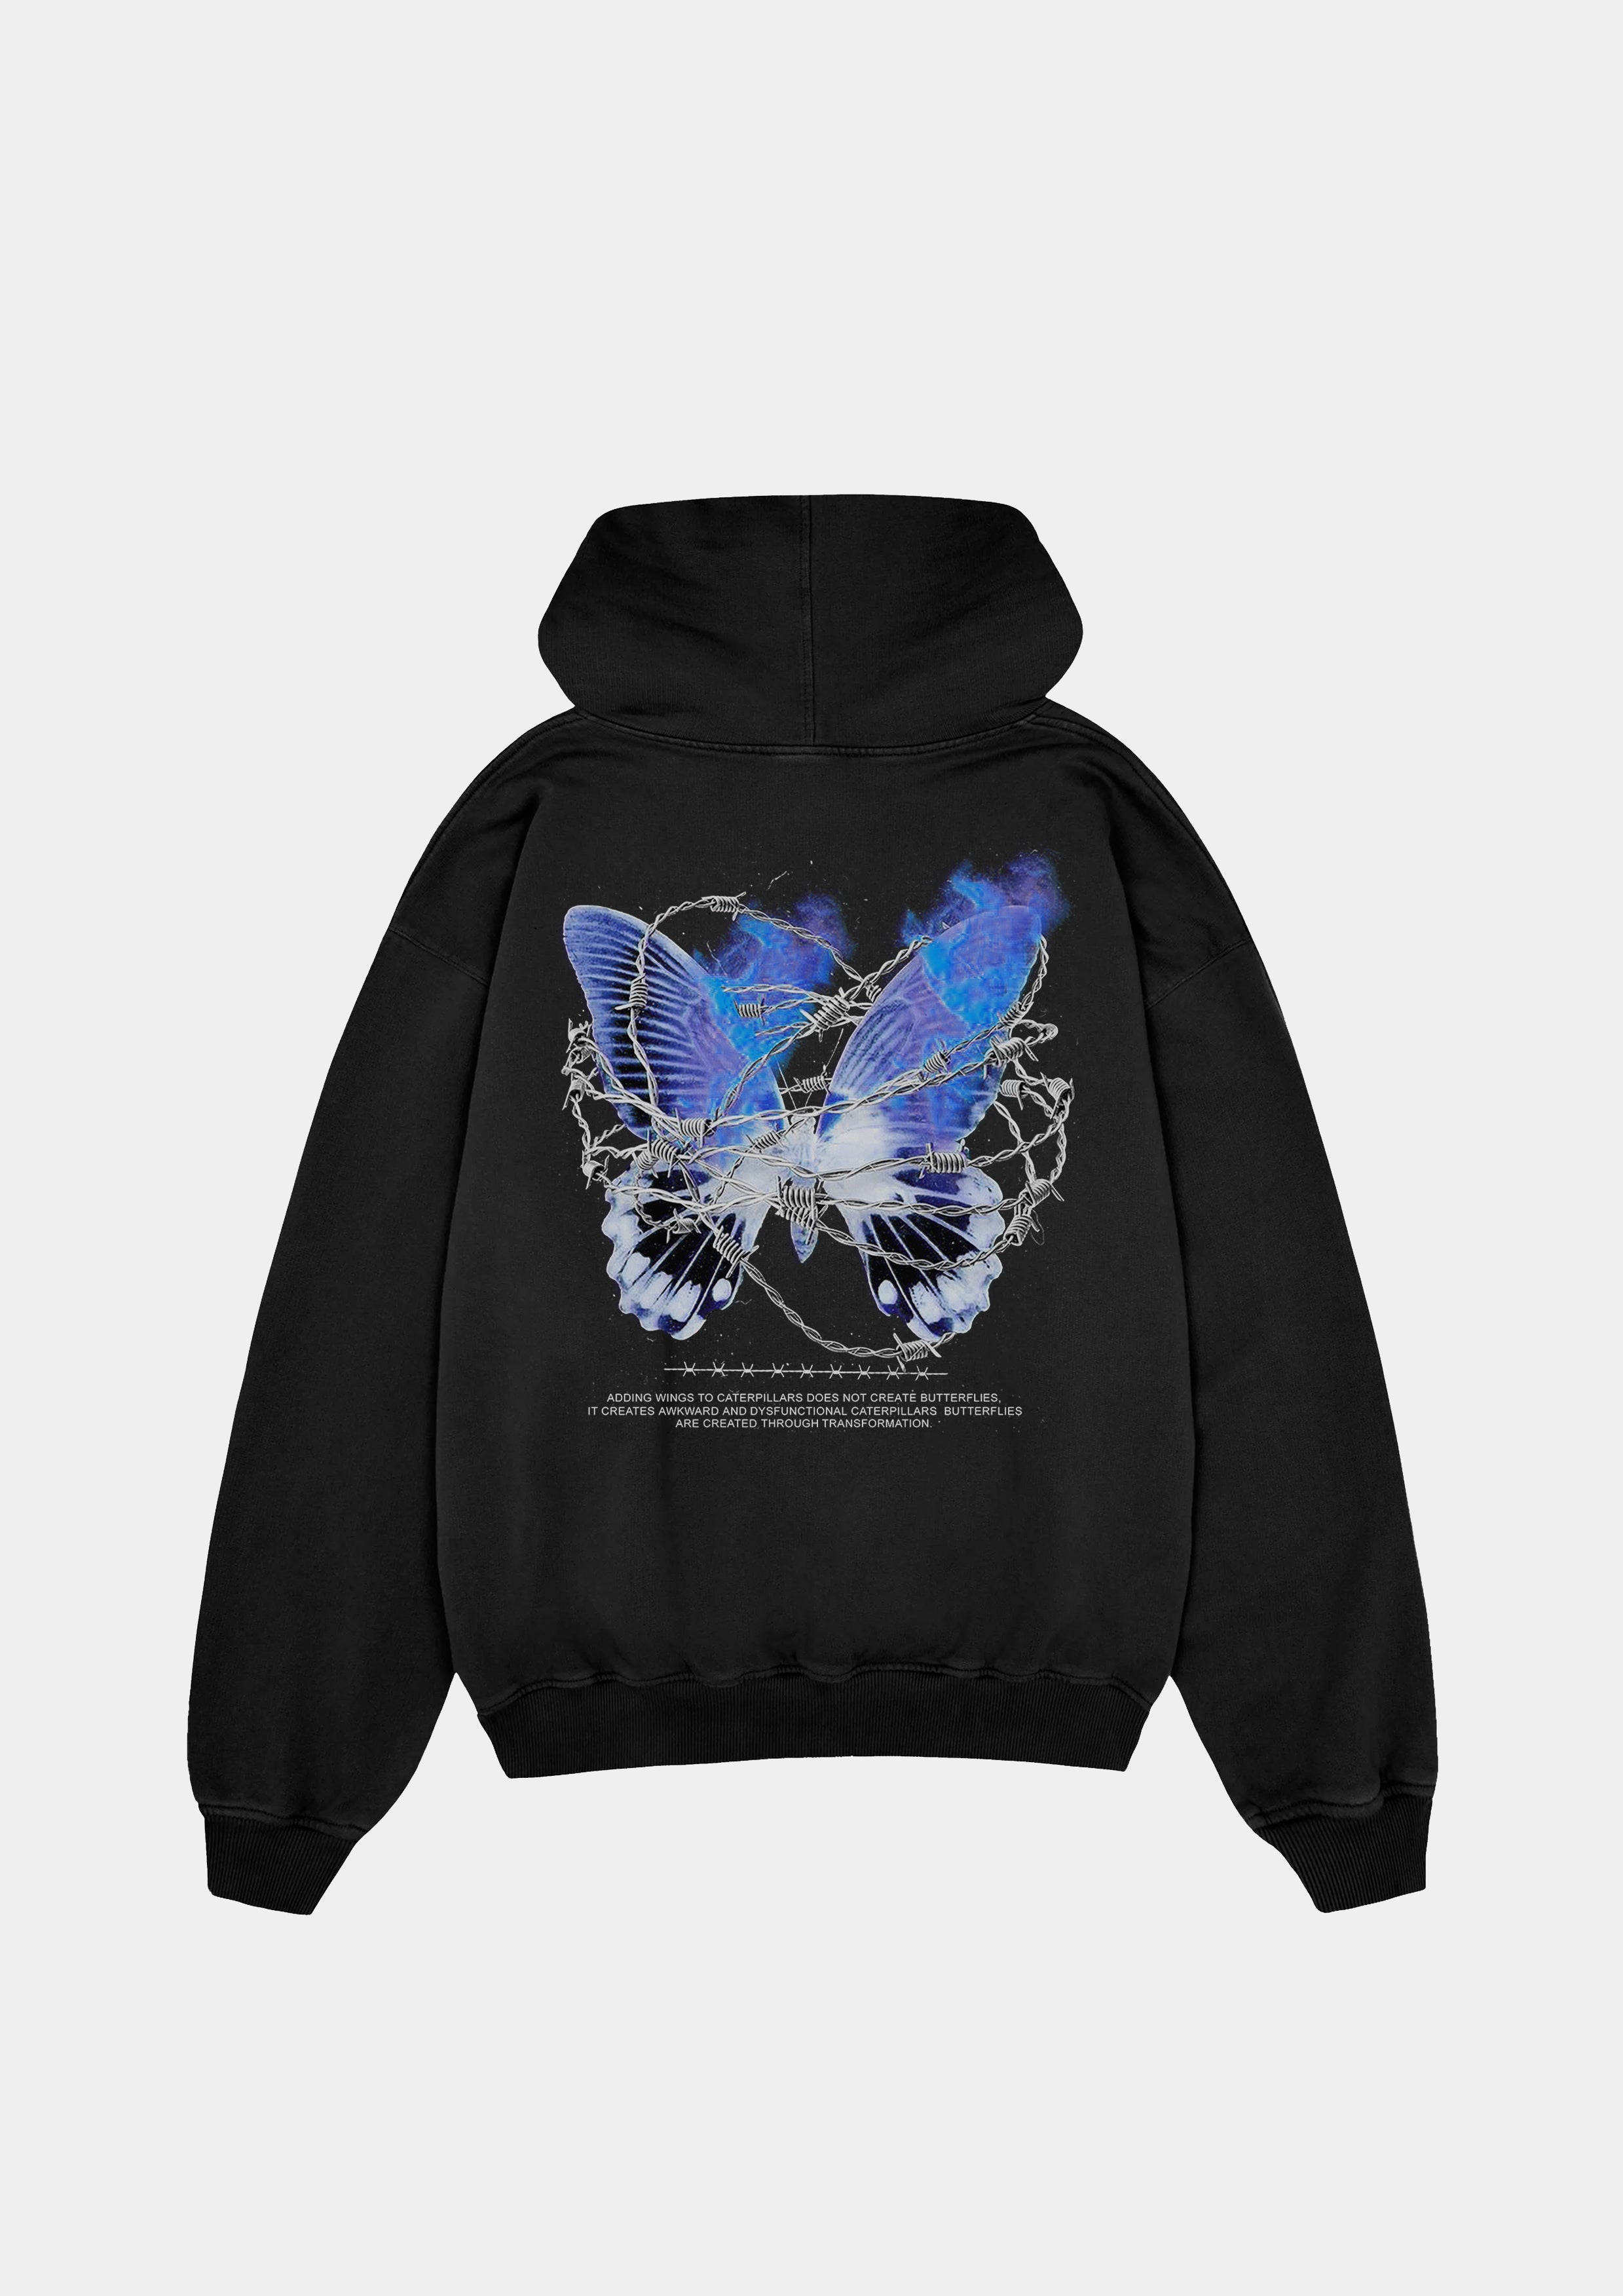 Butterfly Effect 480GSM Oversized Hoodie - Jet Black - UNEFFECTED STUDIOS® - HOODIE - UNEFFECTED STUDIOS®